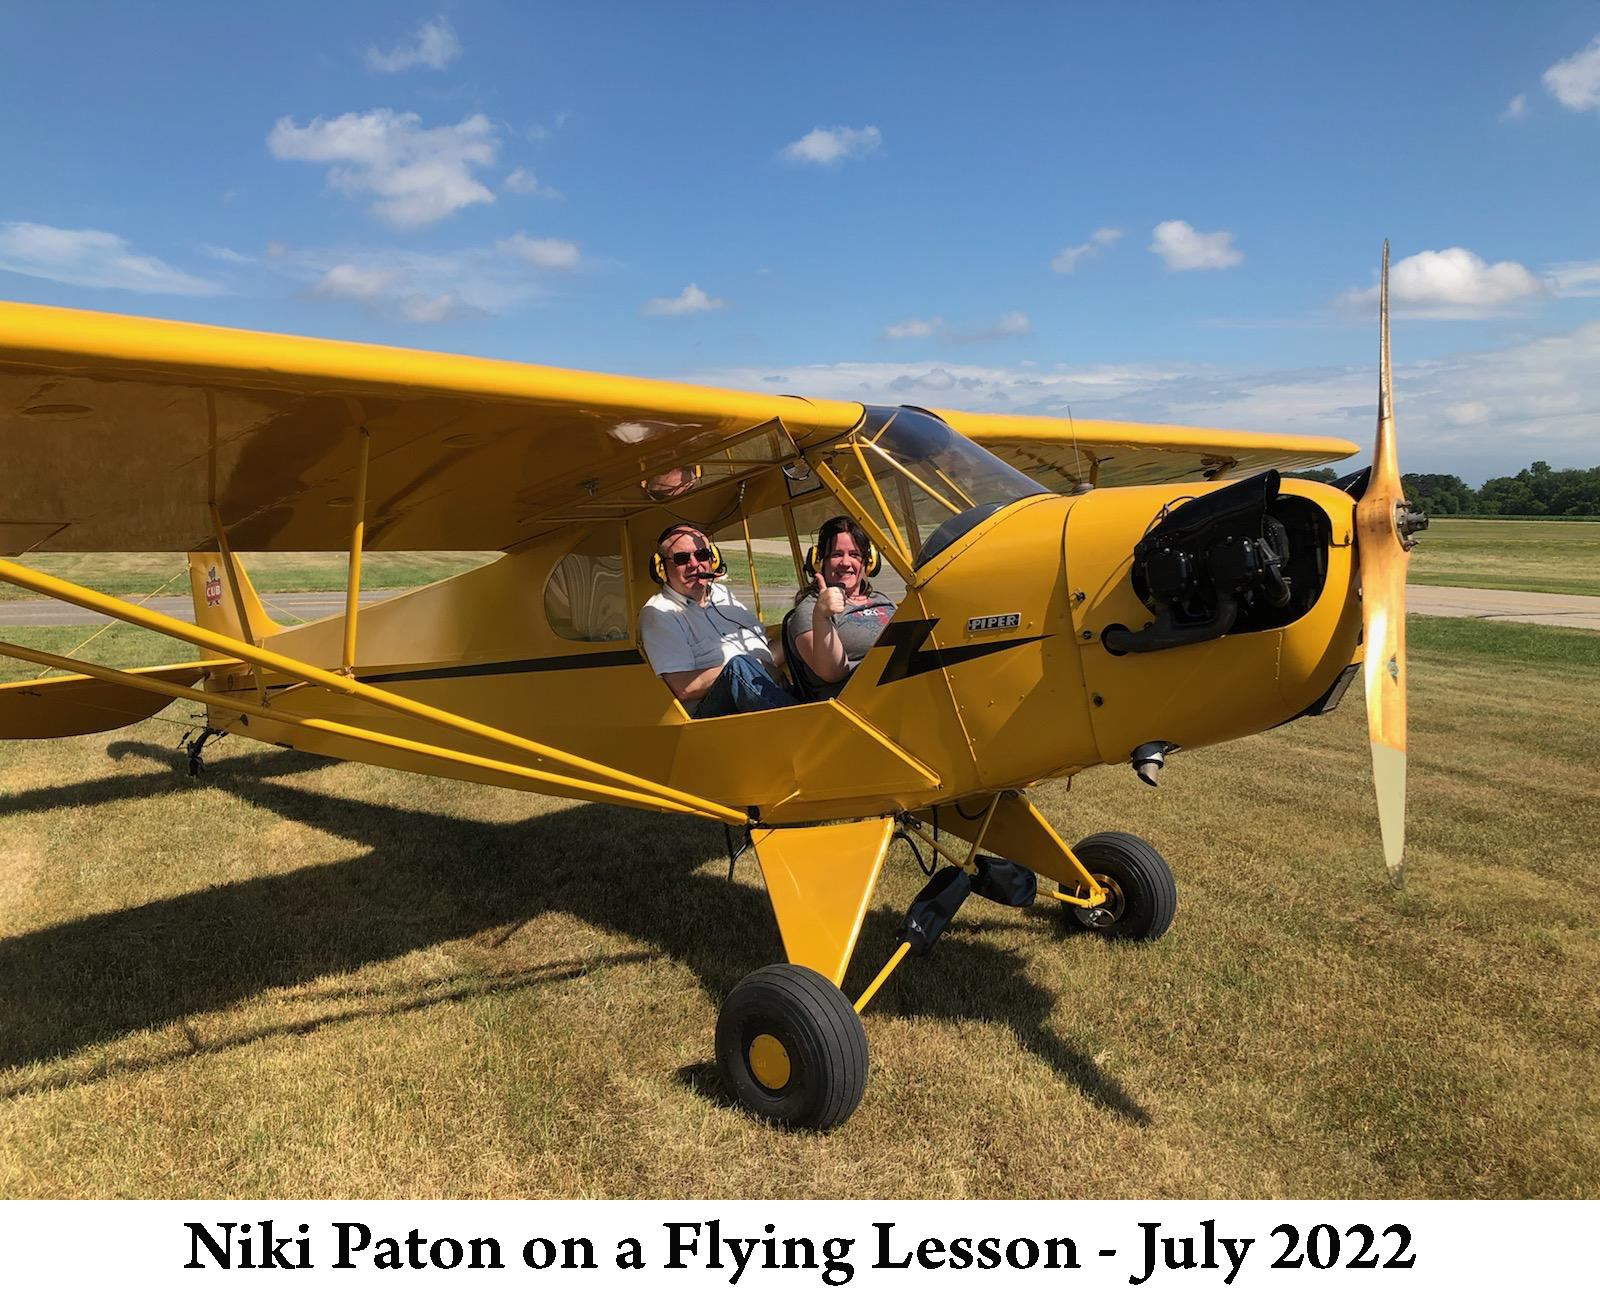 Niki Paton with her flight instructor in a Piper J-3 Cub